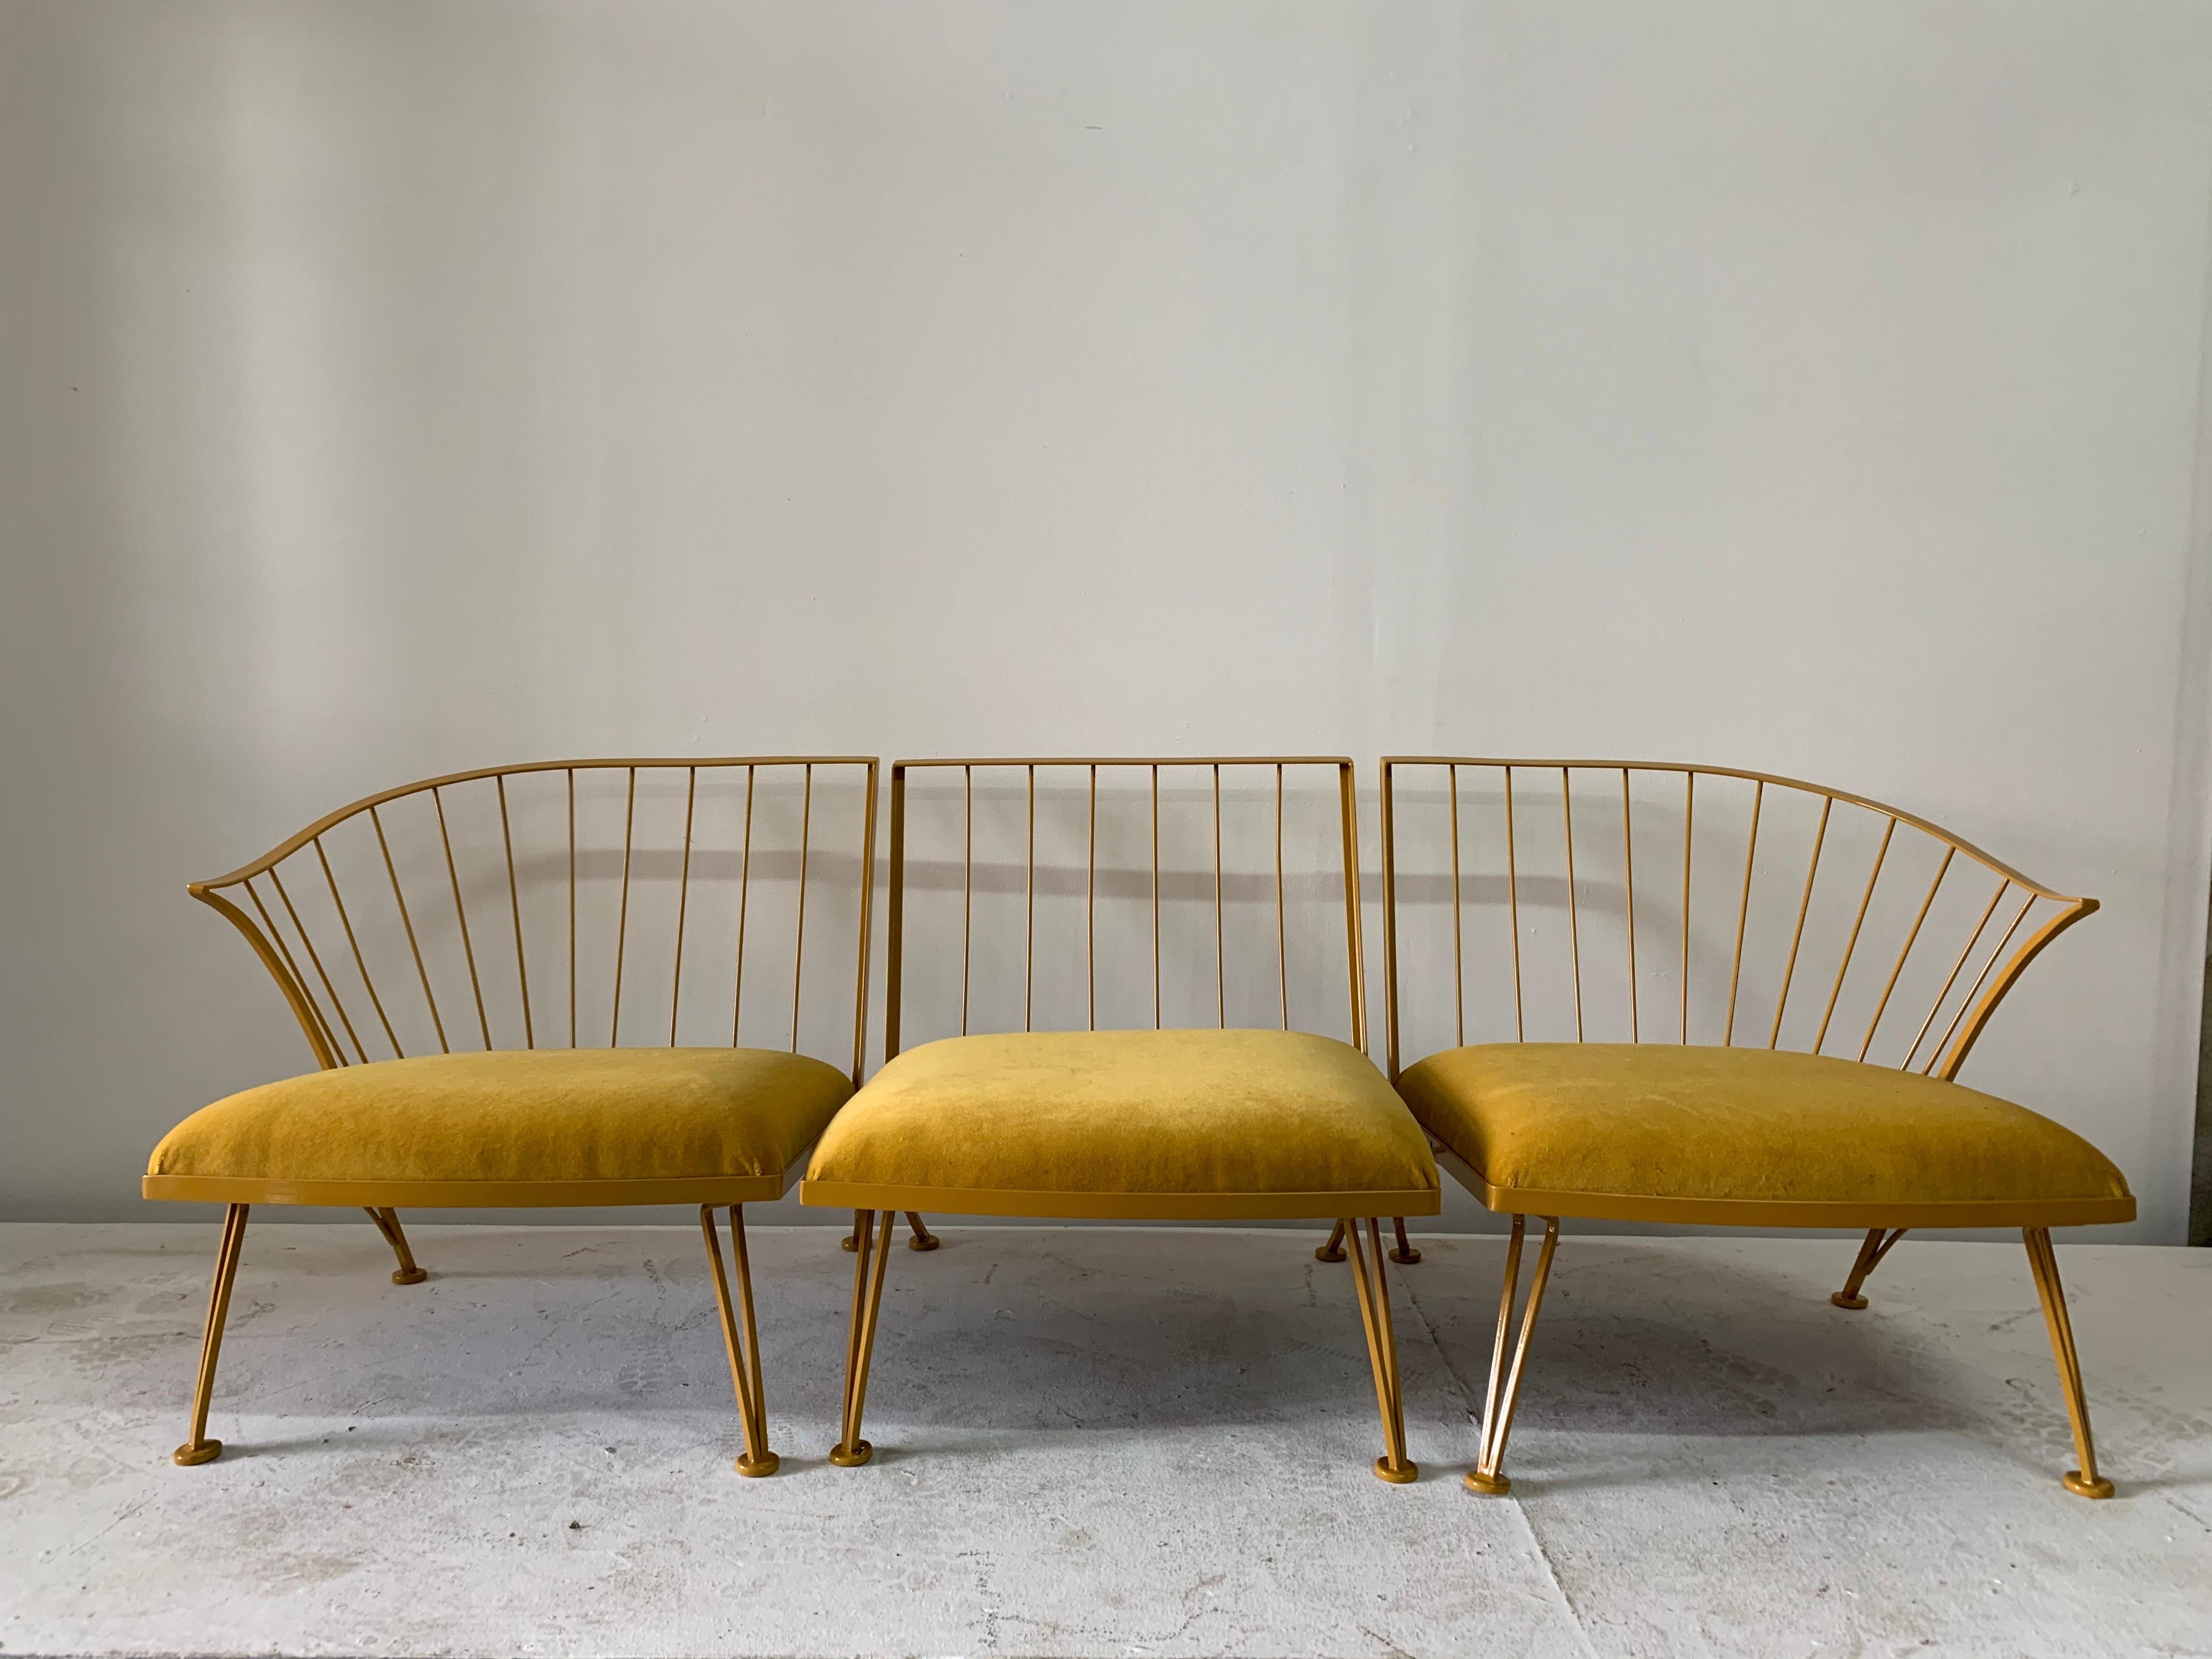 Made from three sections this newly powder coated iron Woodard set “Cat yellow” and finely upholstered in matching cotton/mohair fabric. This has been upholstered for interior use. Pinecrest pattern can be placed into several formations (as a